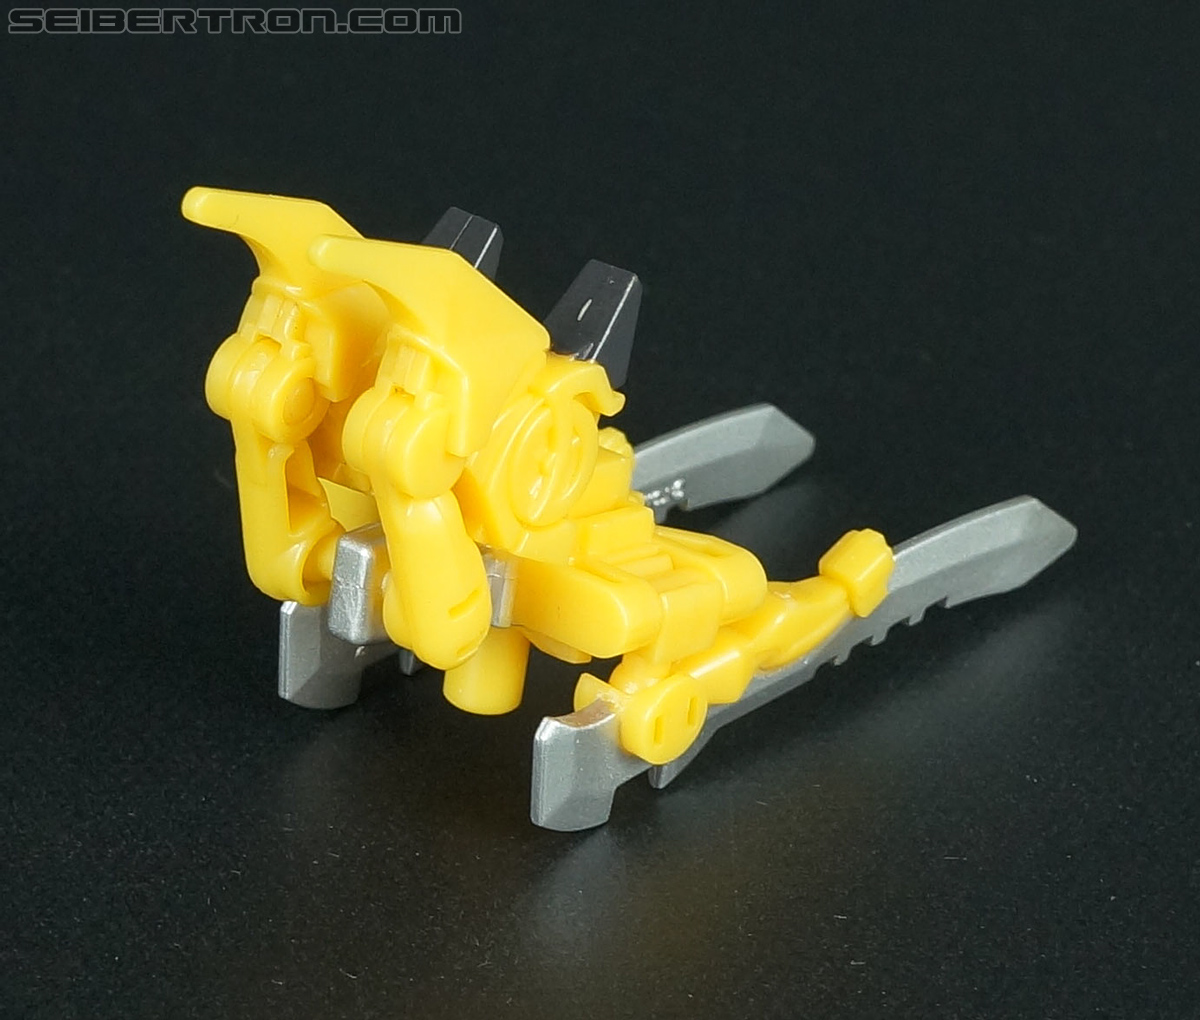 Transformers Arms Micron Bumblebee Sword (Image #60 of 75)